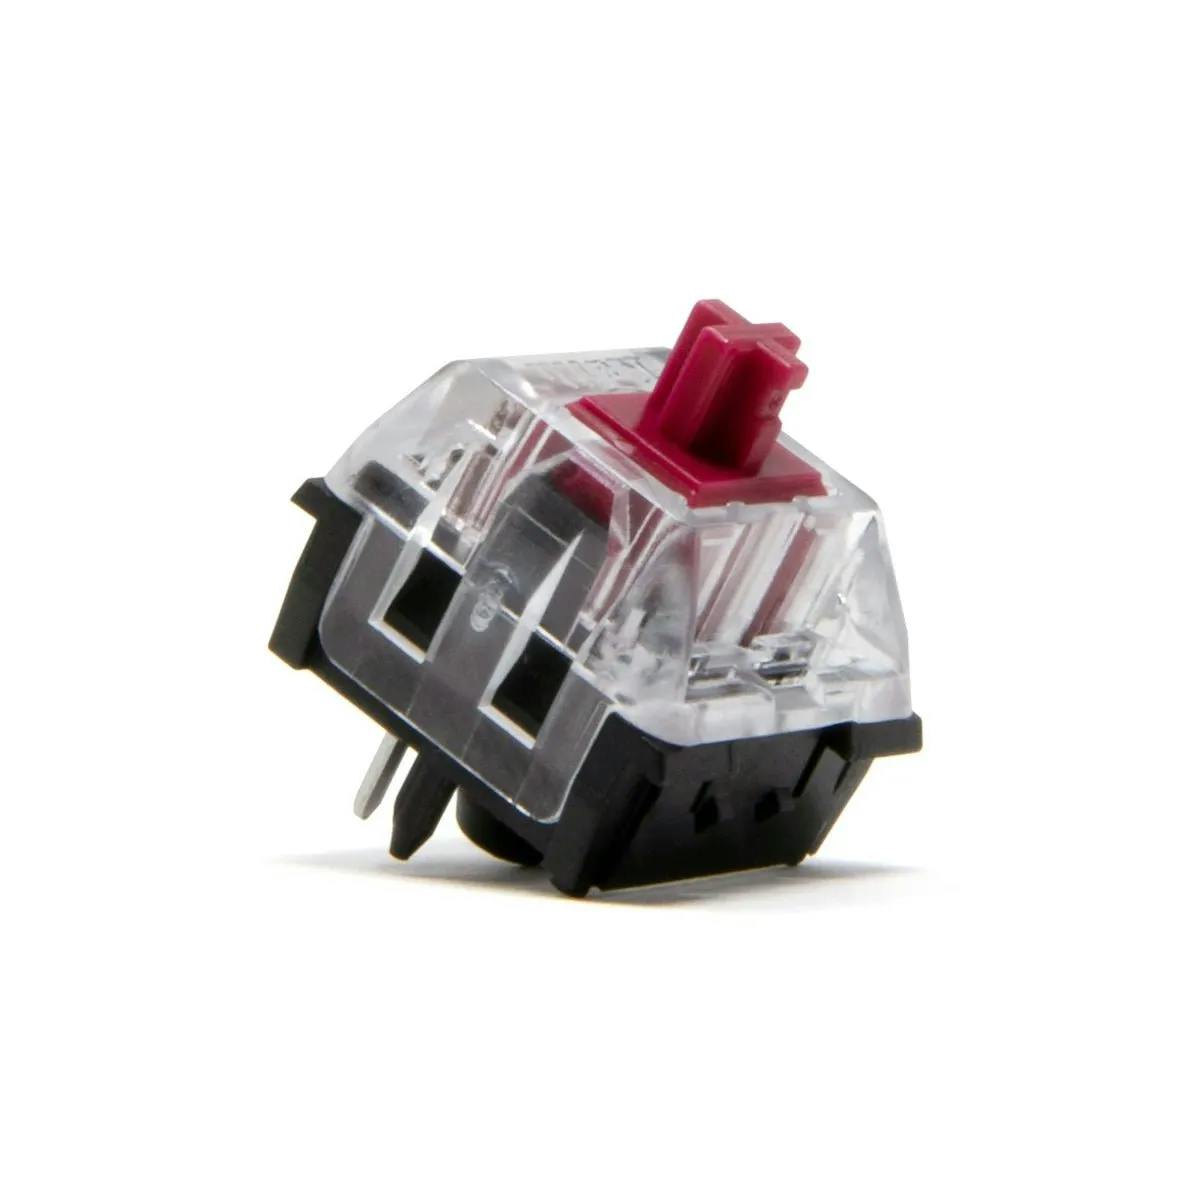 Image for Kailh Speed Pro Burgundy Linear Switches (Original Stem)